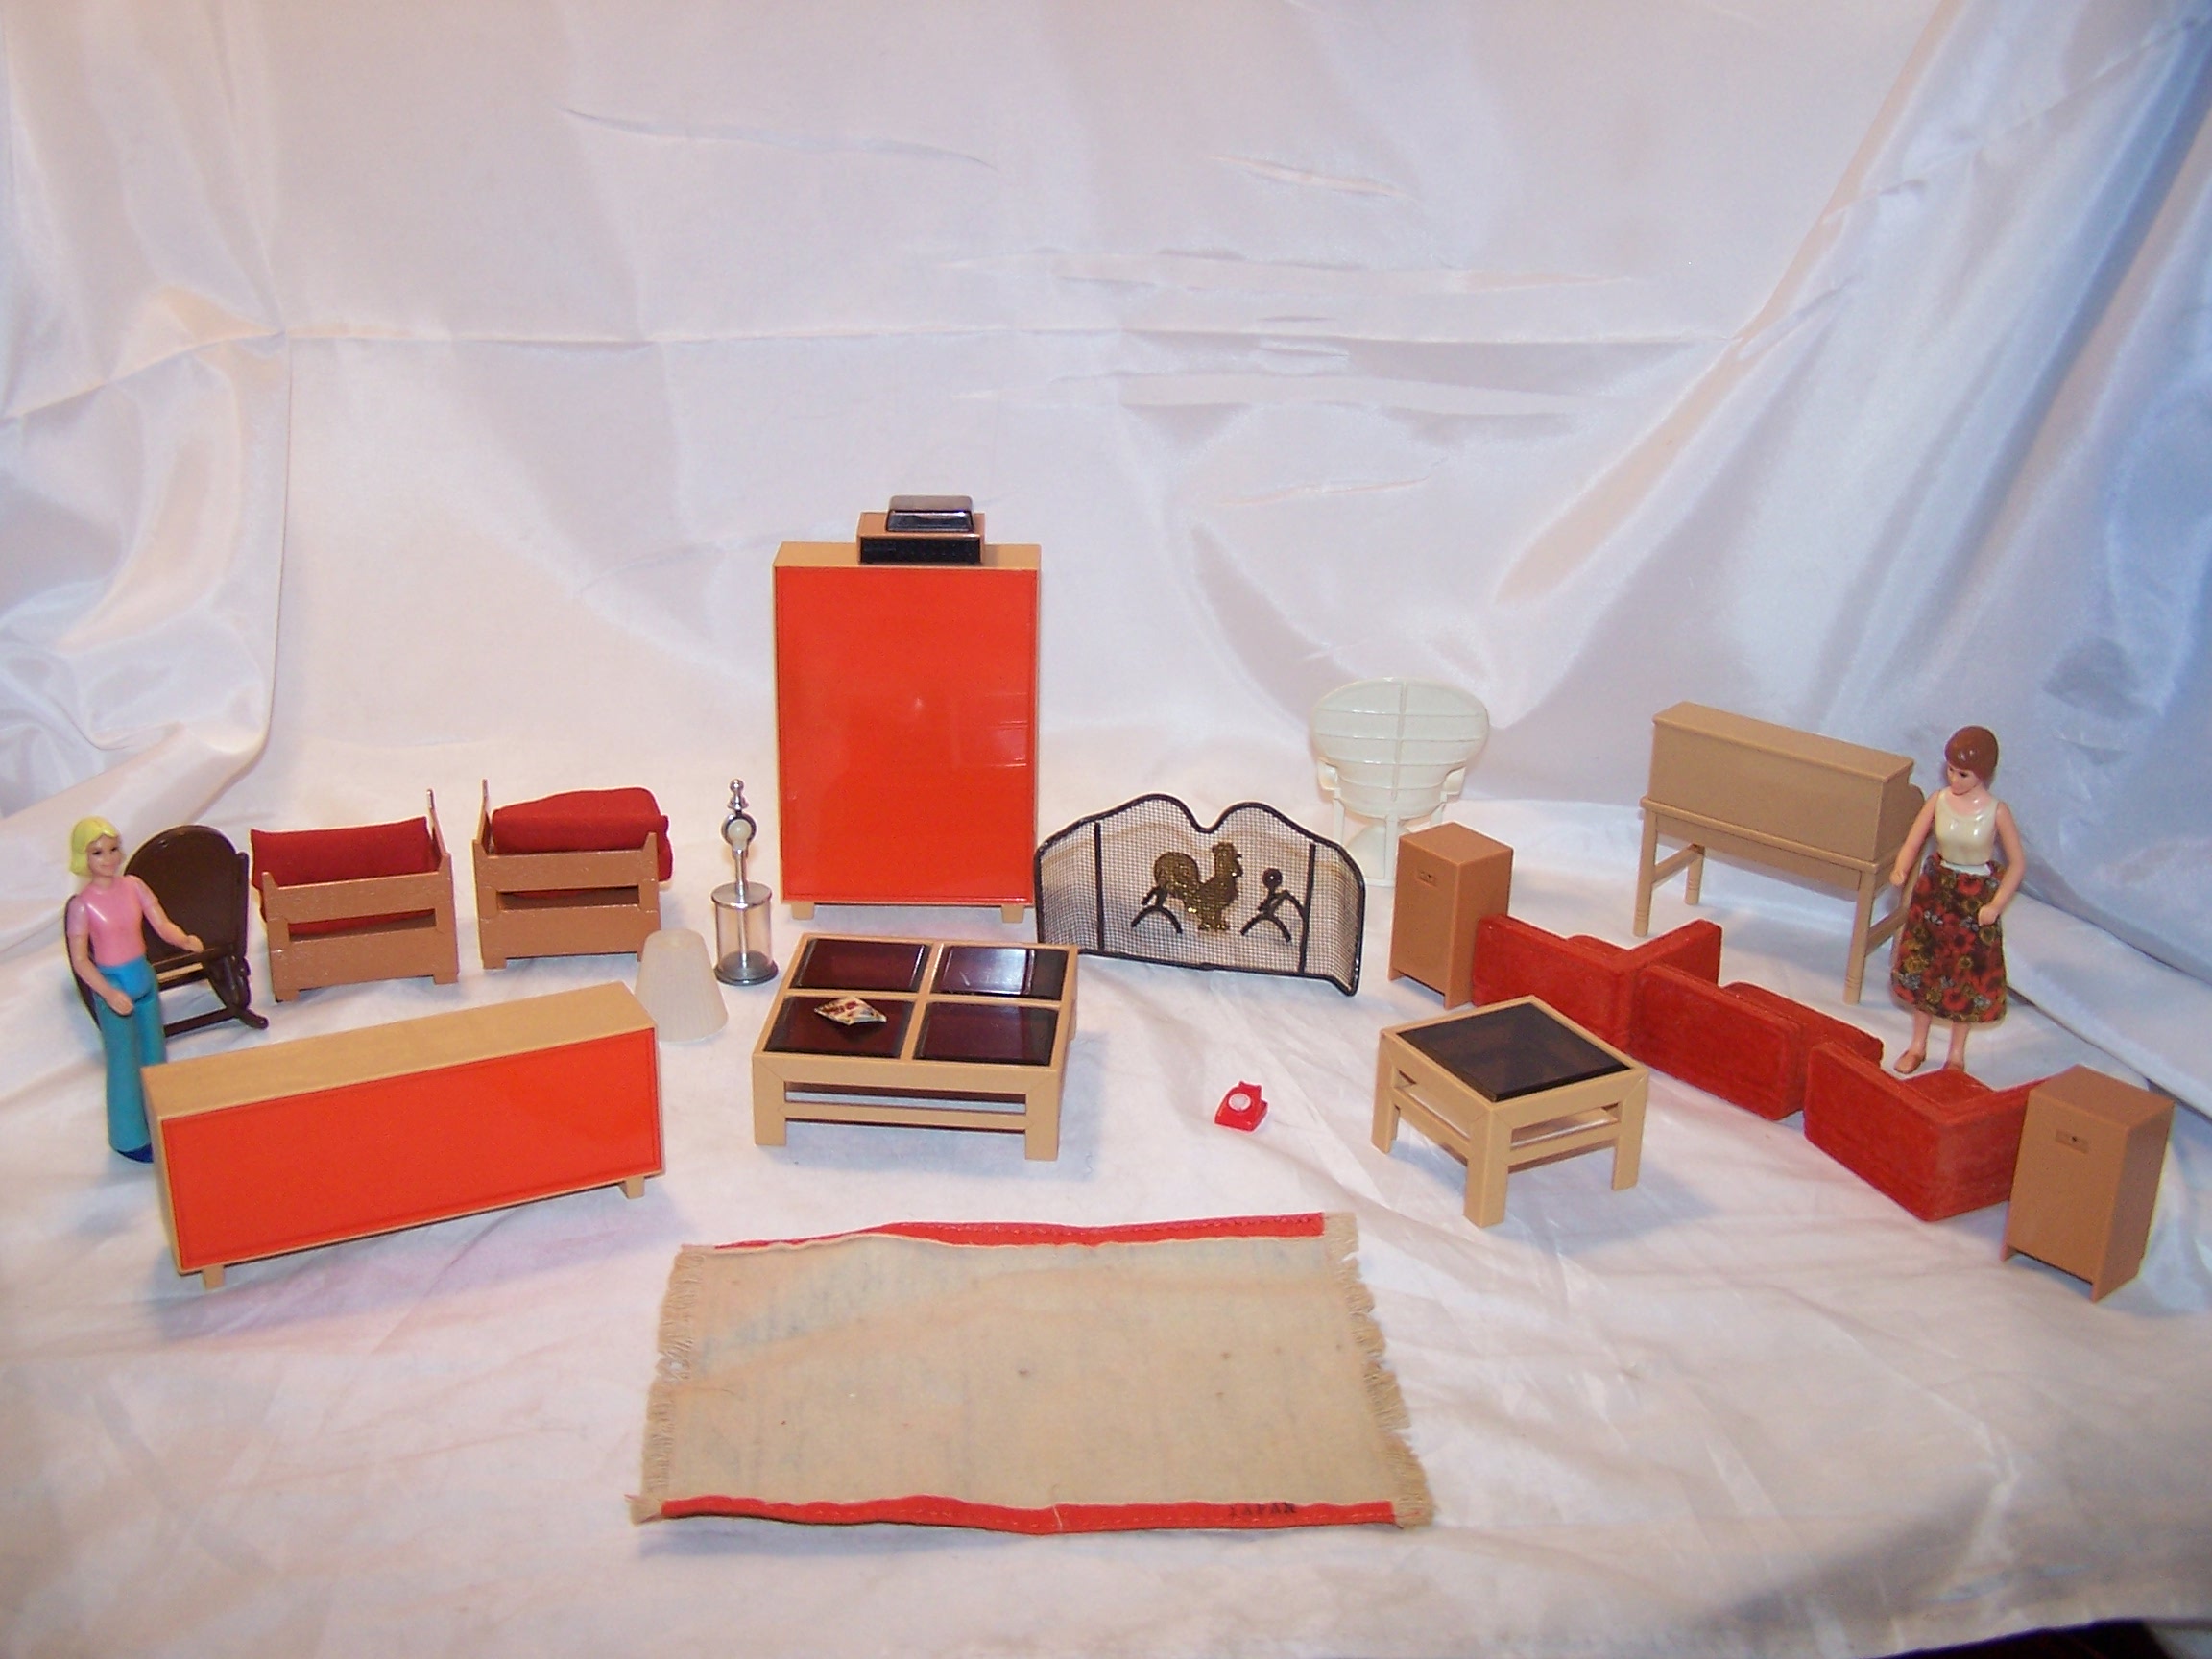 Image 50 of Dollhouse w Family, Furniture, Tomy